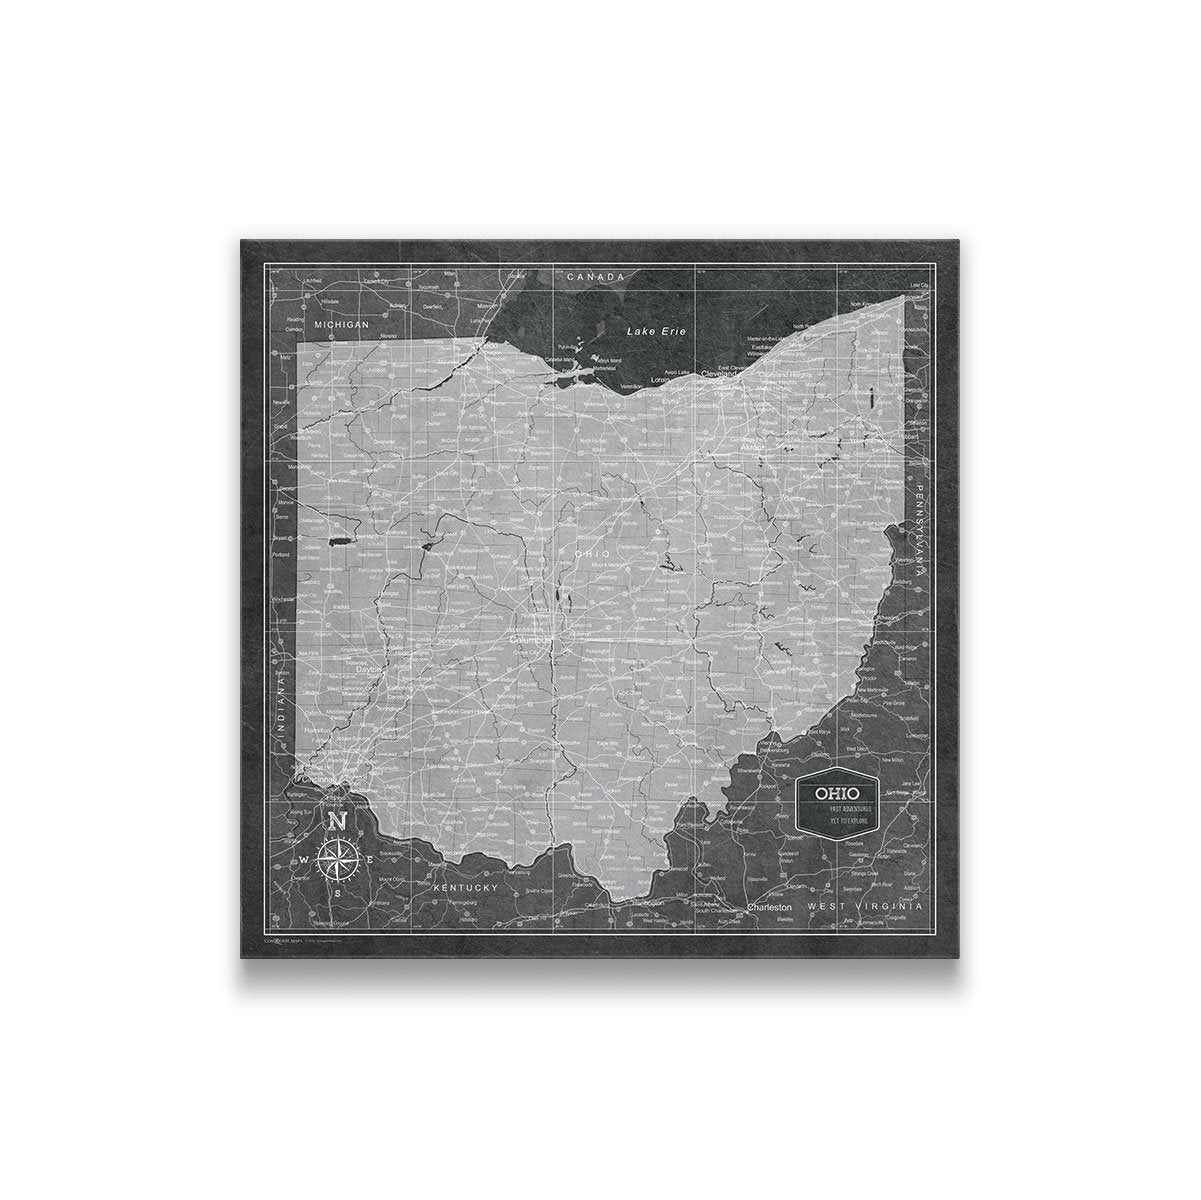 Map Out Your Travels Through Ohio